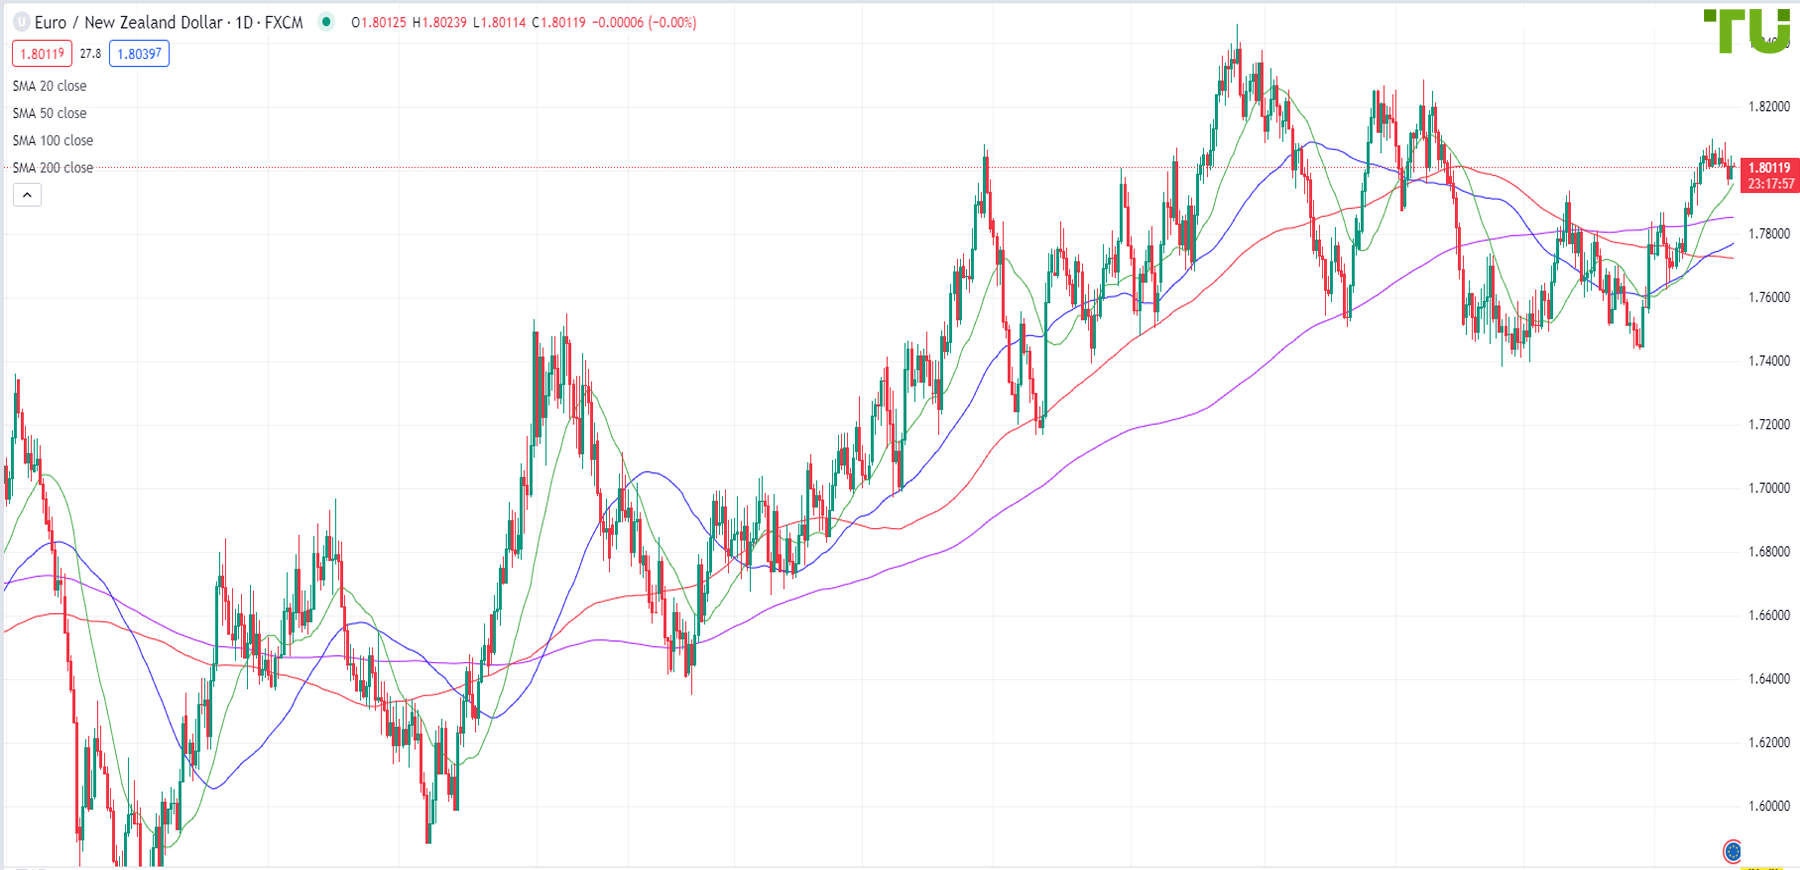 Euro/Kiwi is trying to continue its recovery